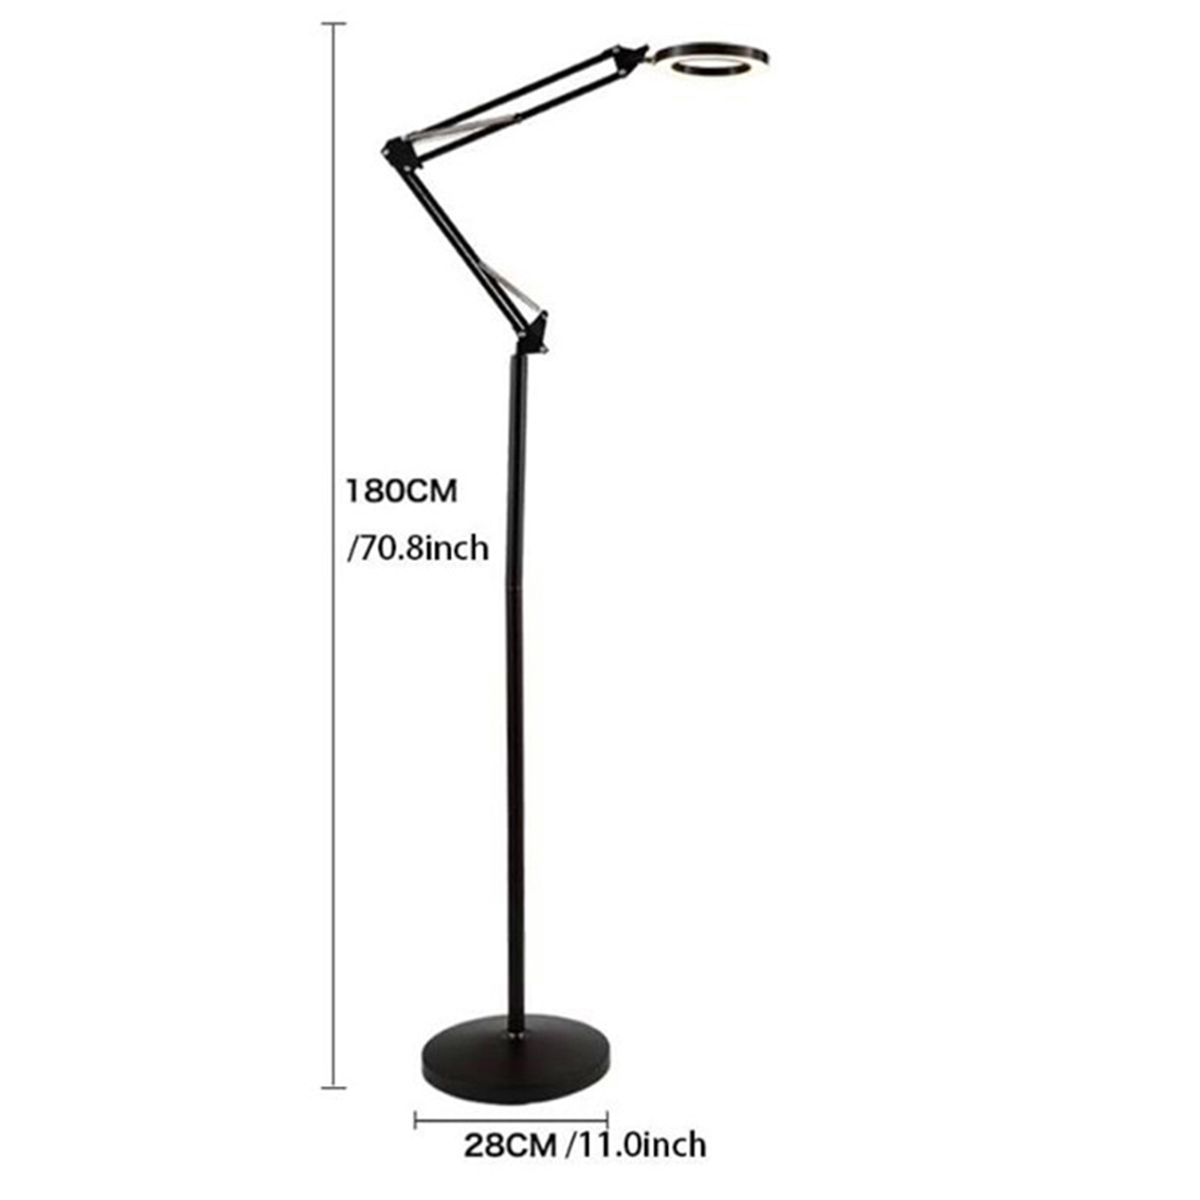 Magnifying-Glass-Desk-Lamp-Magnifier-LED-Light-Foldable-Reading-Lamp-with-Three-Dimming-Modes-USB-Po-1768223-4